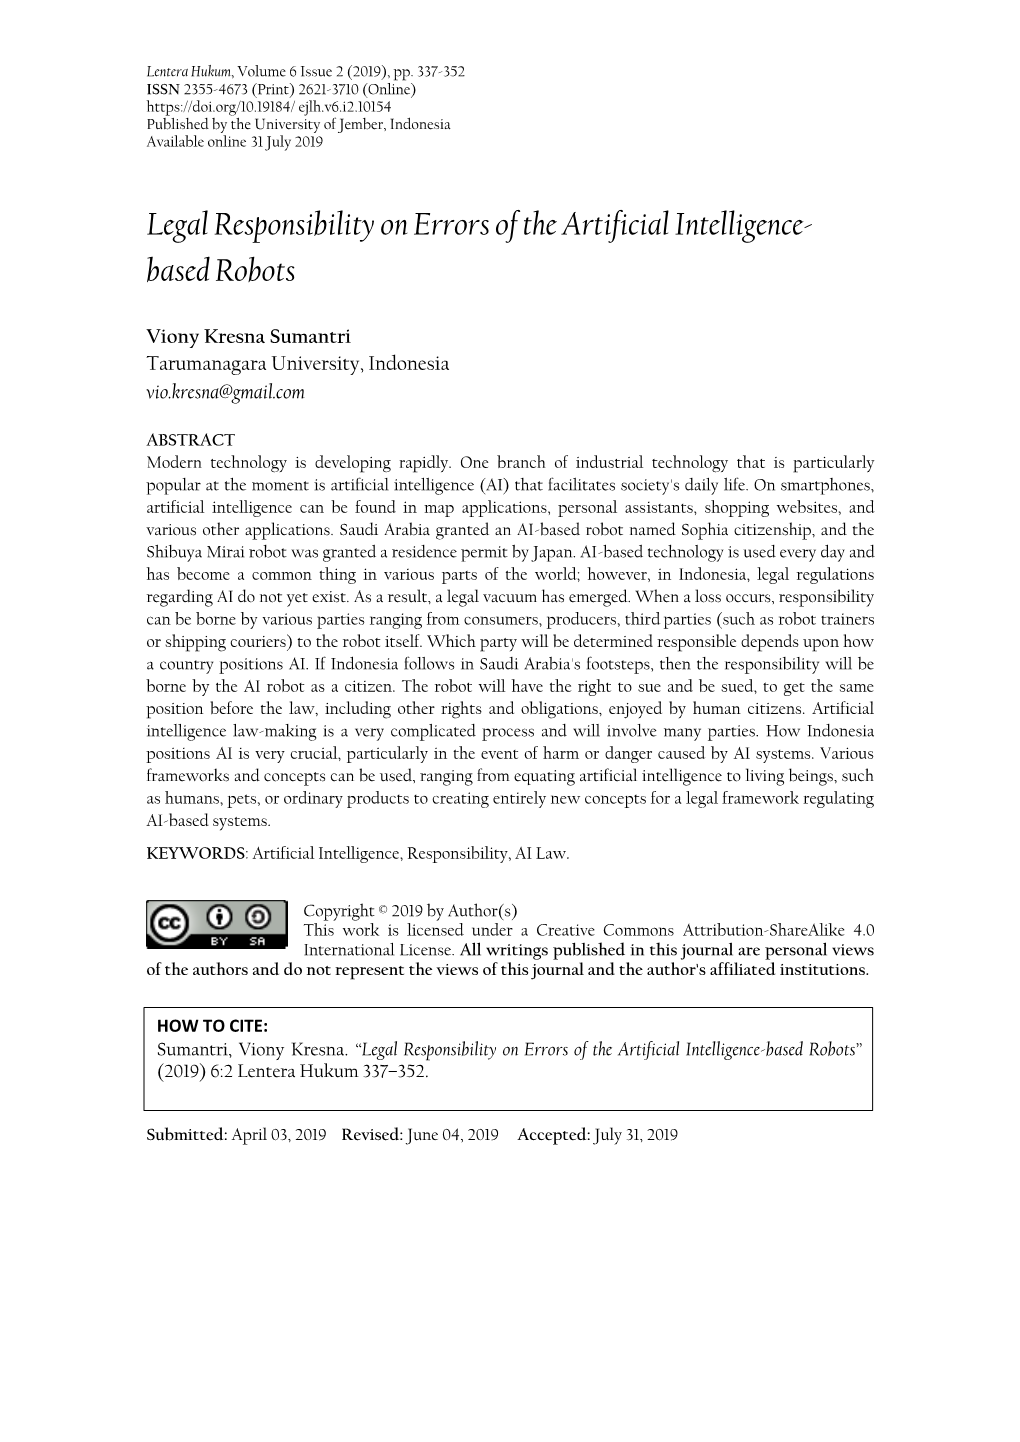 Legal Responsibility on Errors of the Artificial Intelligence- Based Robots